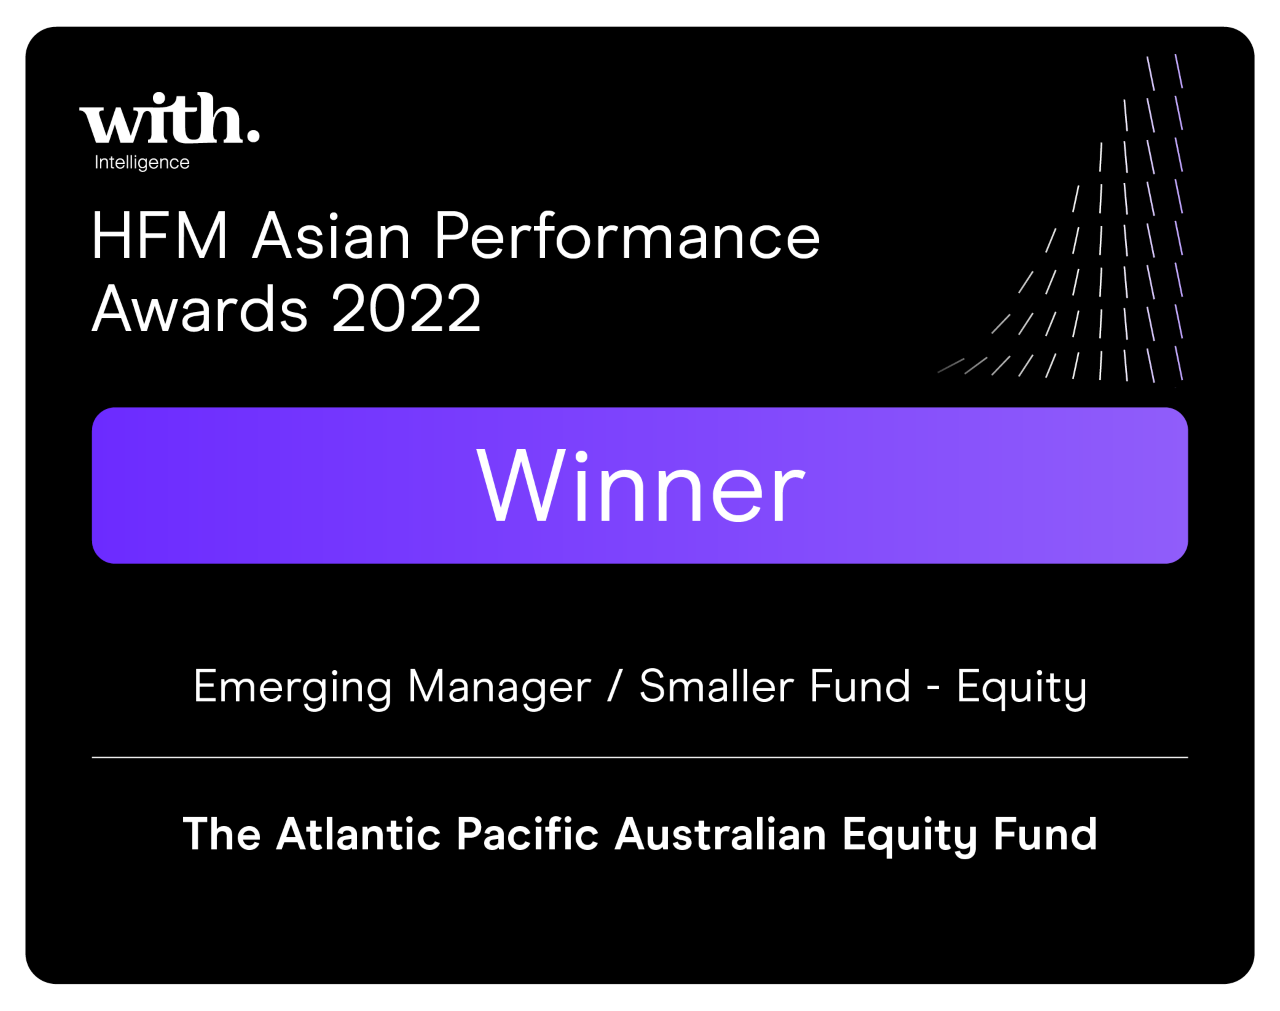 2022 Asian Perf Awards - Emerging Manager - Smaller Fund - Equity - The Atlantic Pacific Australian Equity Fund